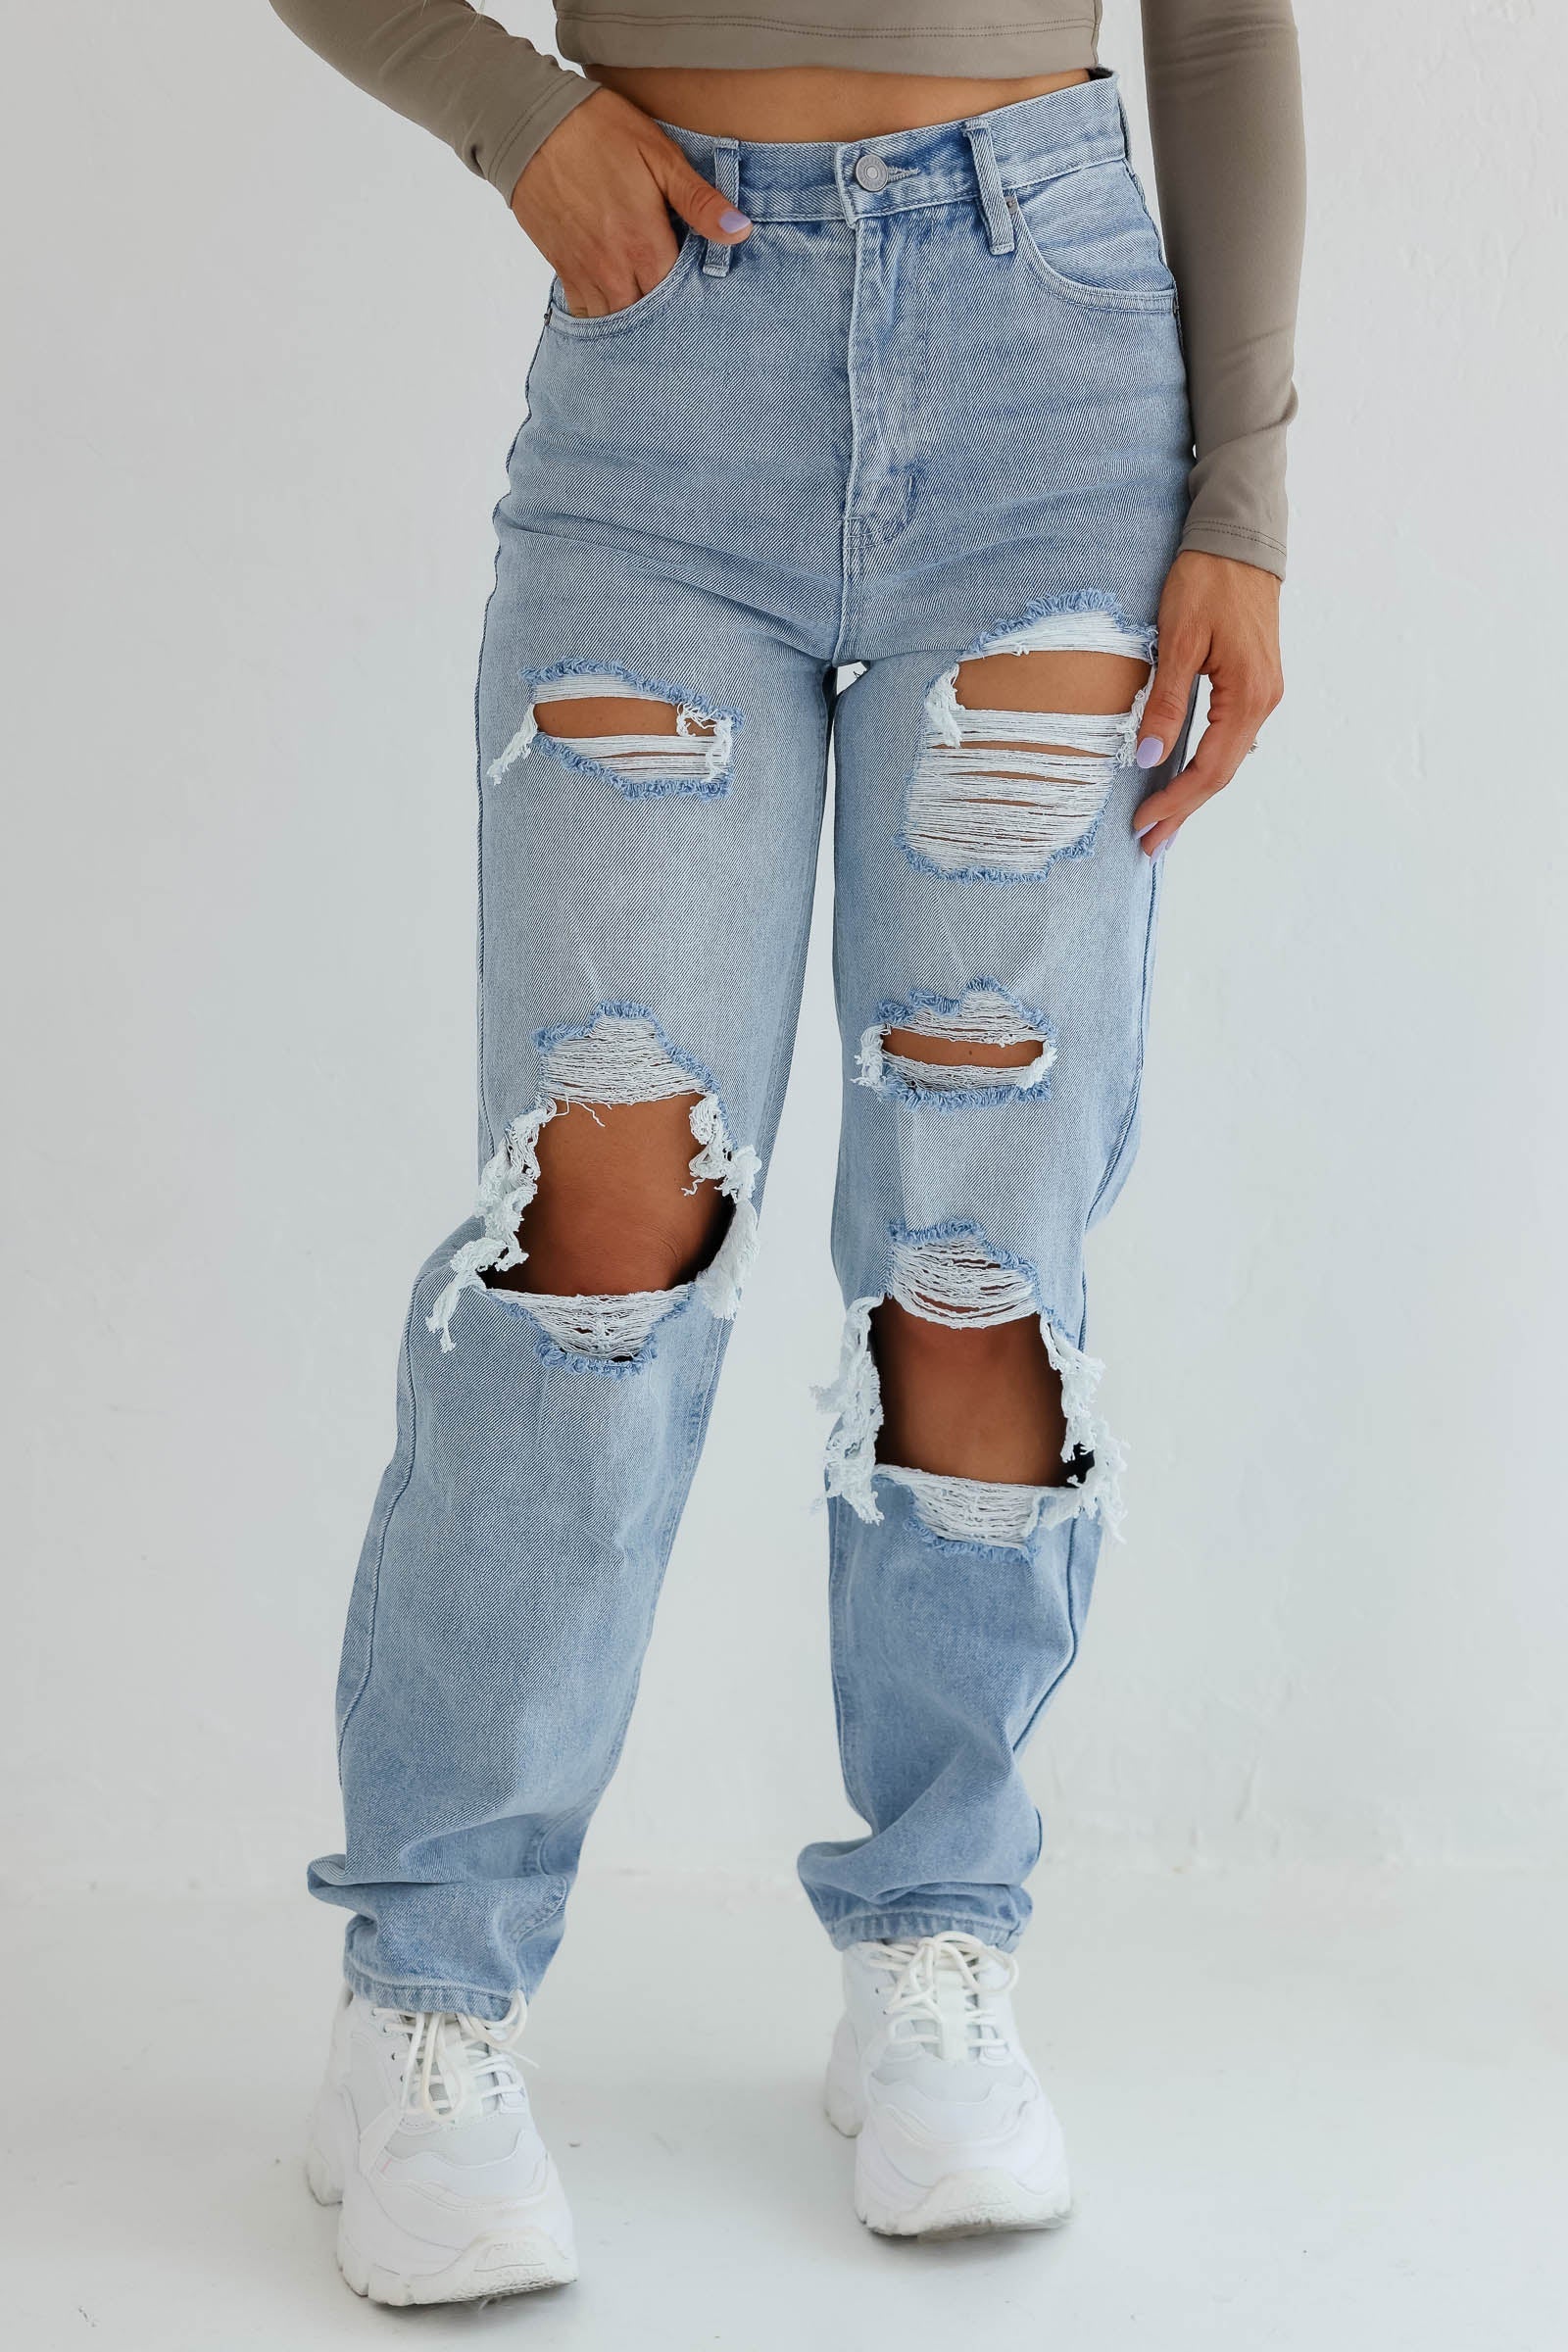 KANCAN Tyra High Rise 90s Distressed Jeans - Light Wash, Closet Candy, 1